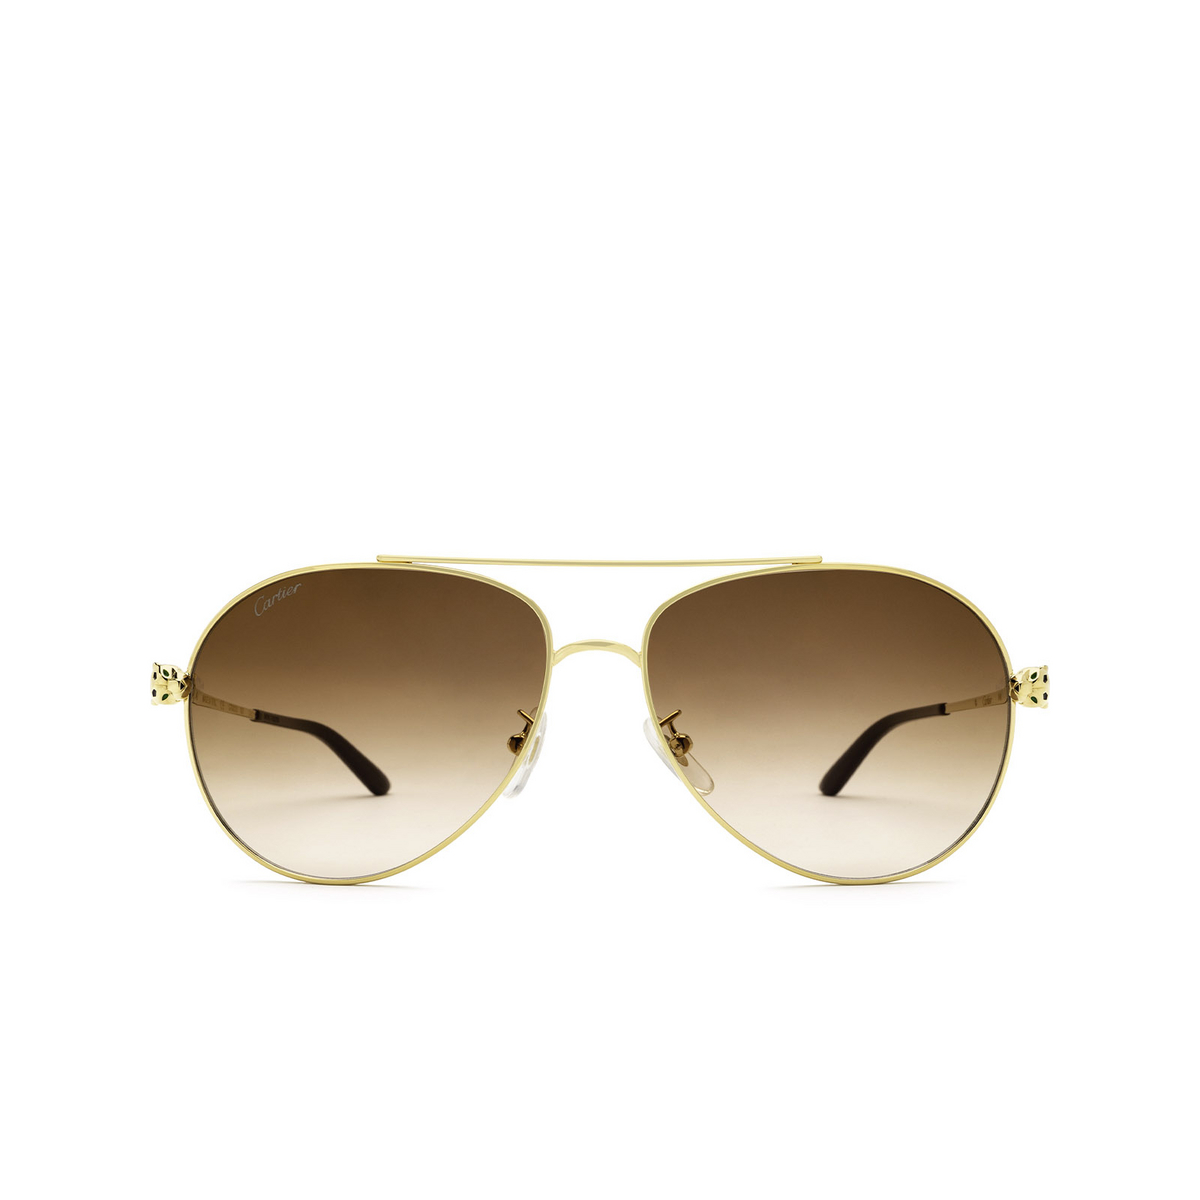 Cartier® Aviator Sunglasses: CT0233S color Gold 002 - front view.